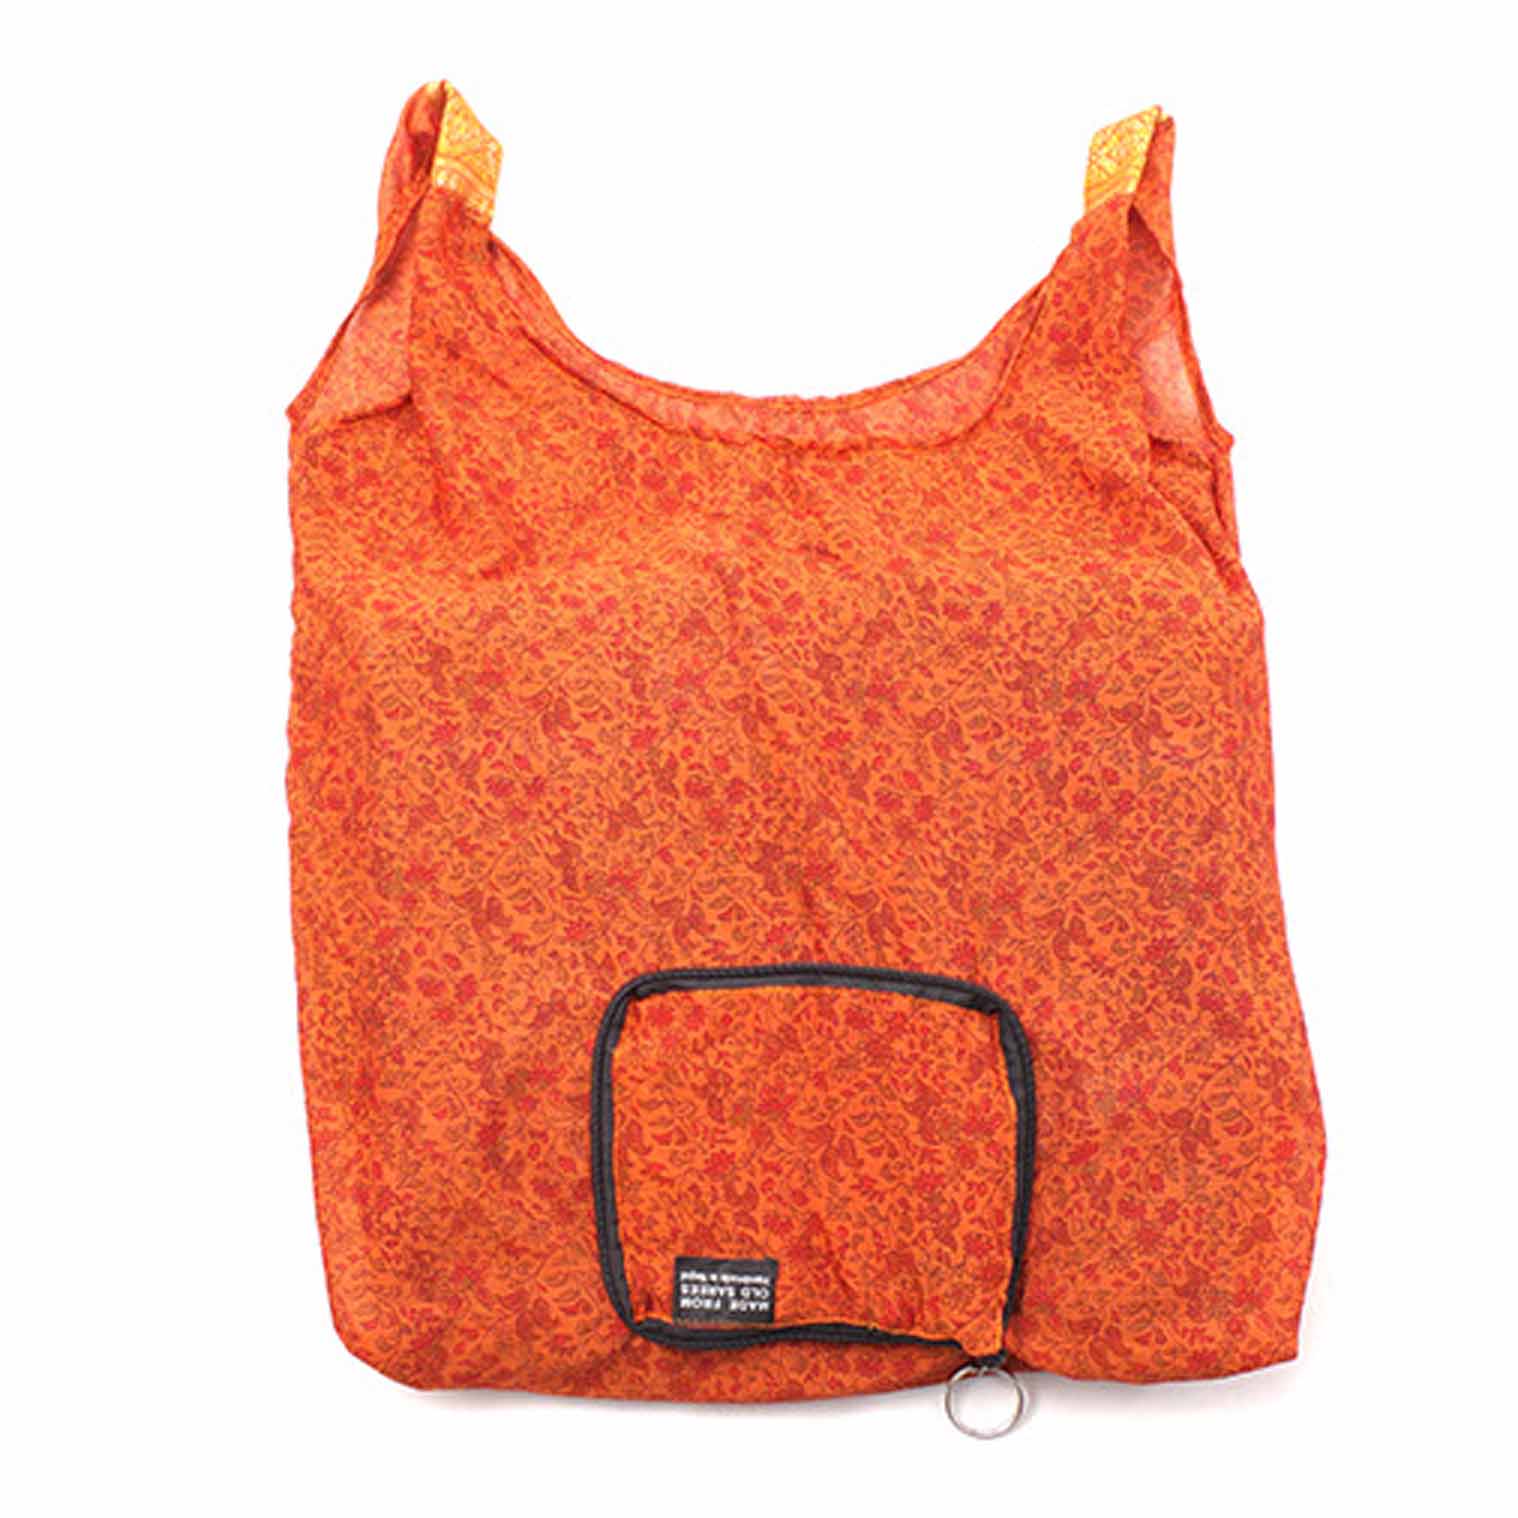 Recycled Sari Packable Shopping Tote Bag